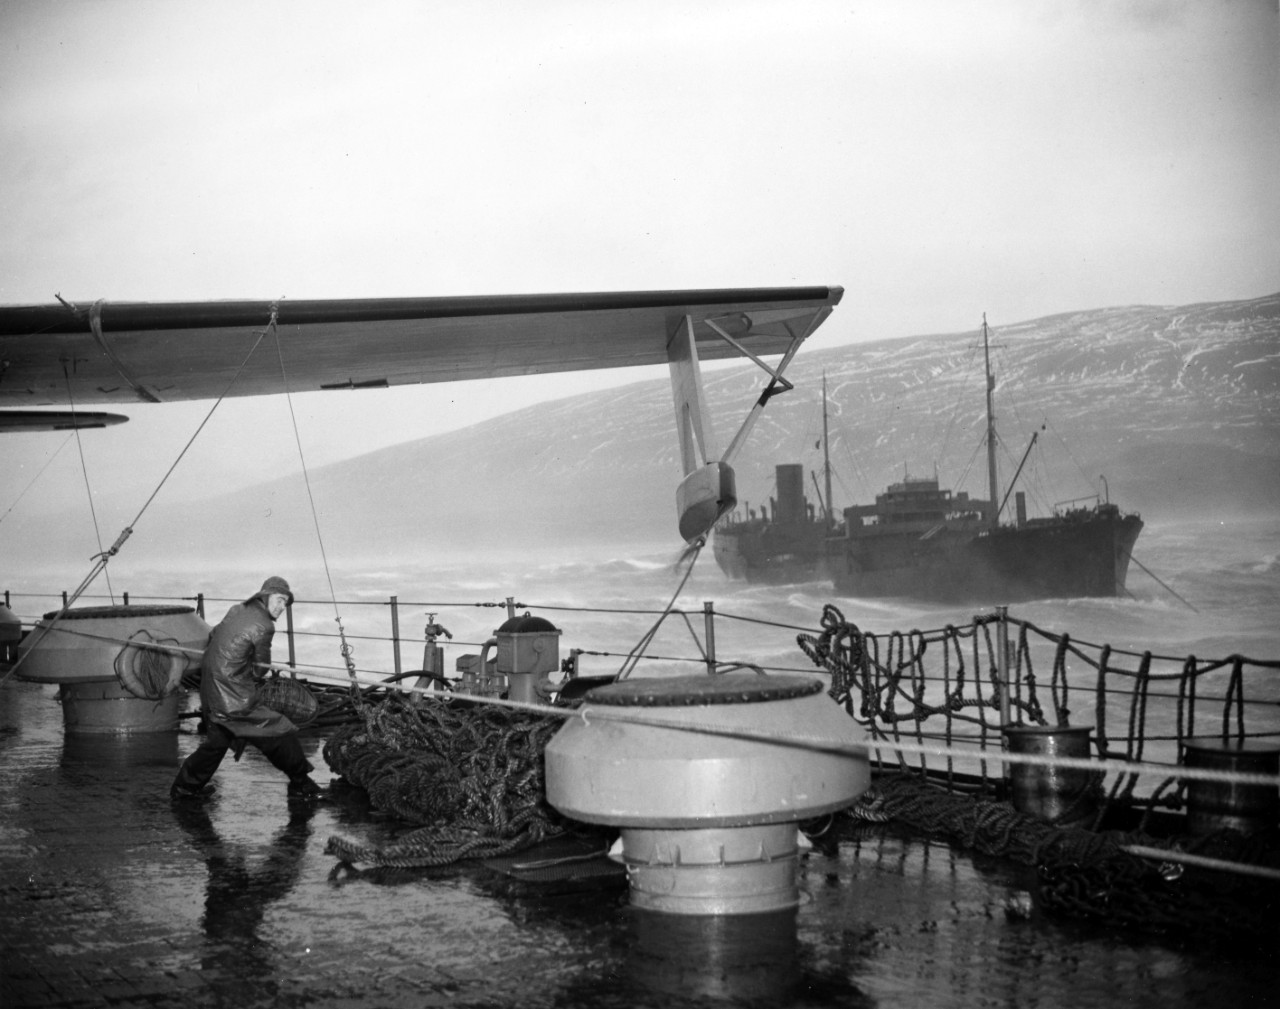 The crew of a seaplane tender struggling to secure seaplanes during a storm off the coast of Hvalfjordur, Iceland. From the VADM Robert C. Giffen Photo Collection.